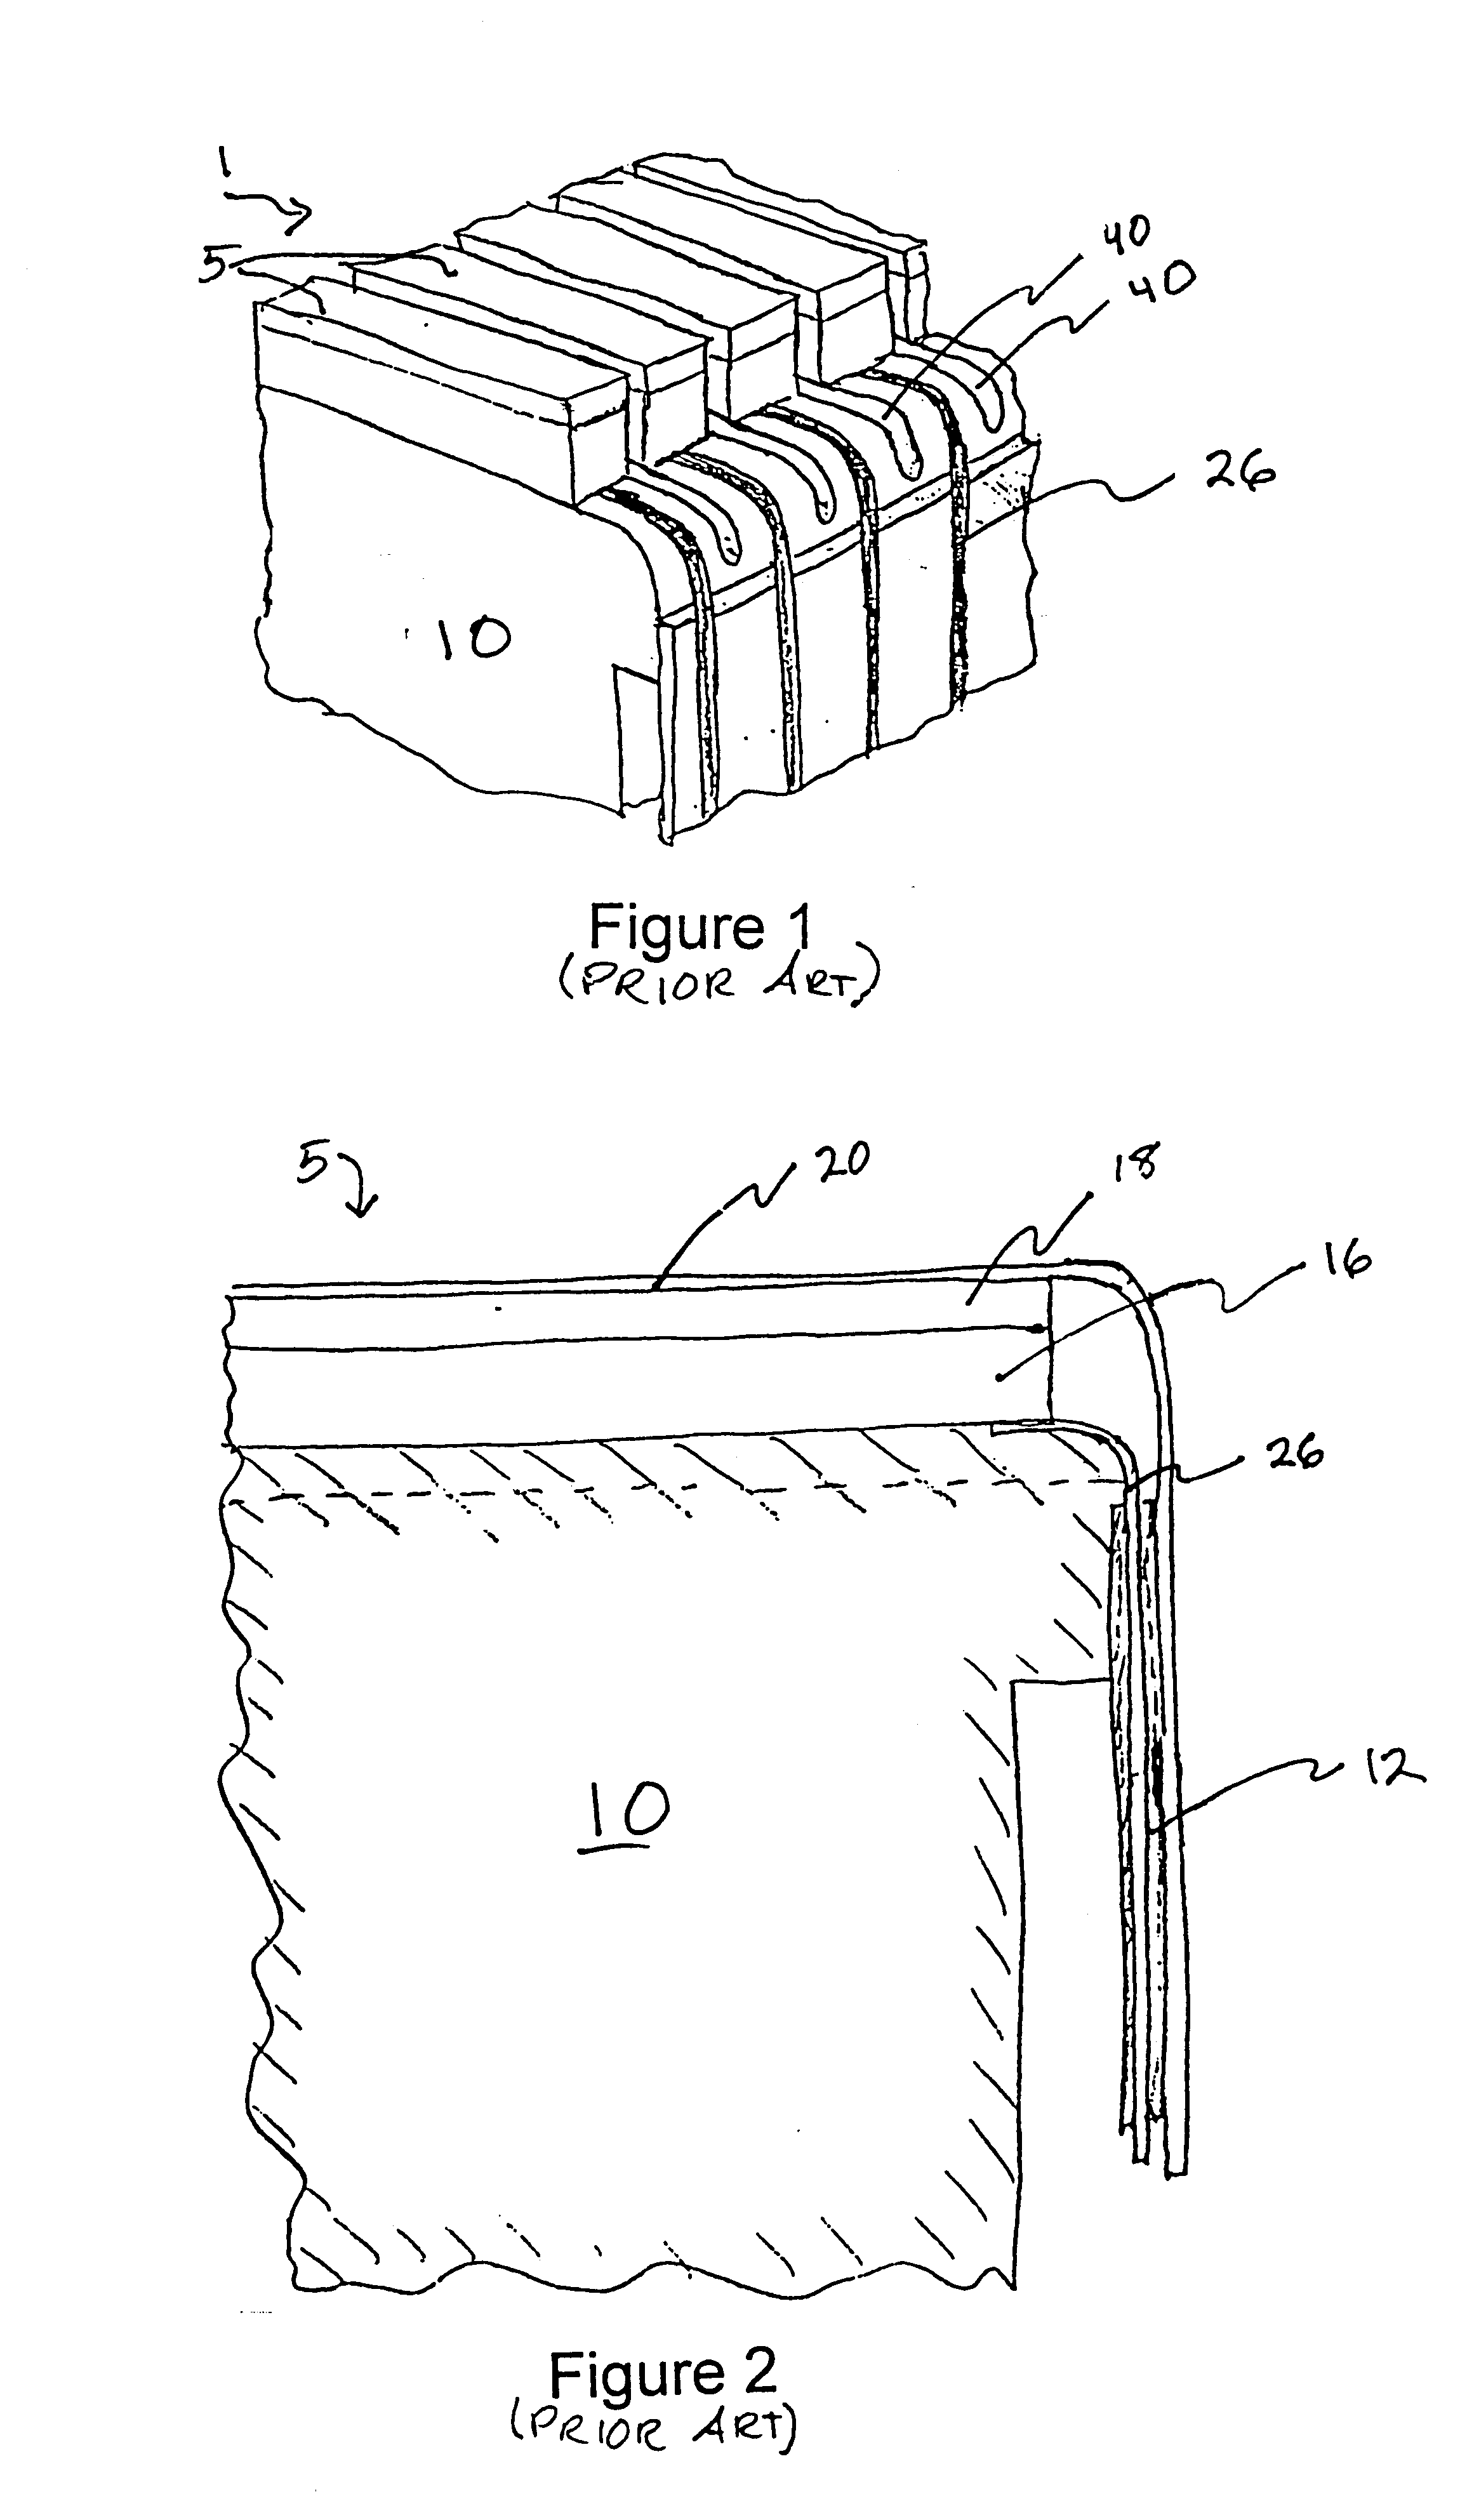 Two-dimensional ultrasound phased array transducer